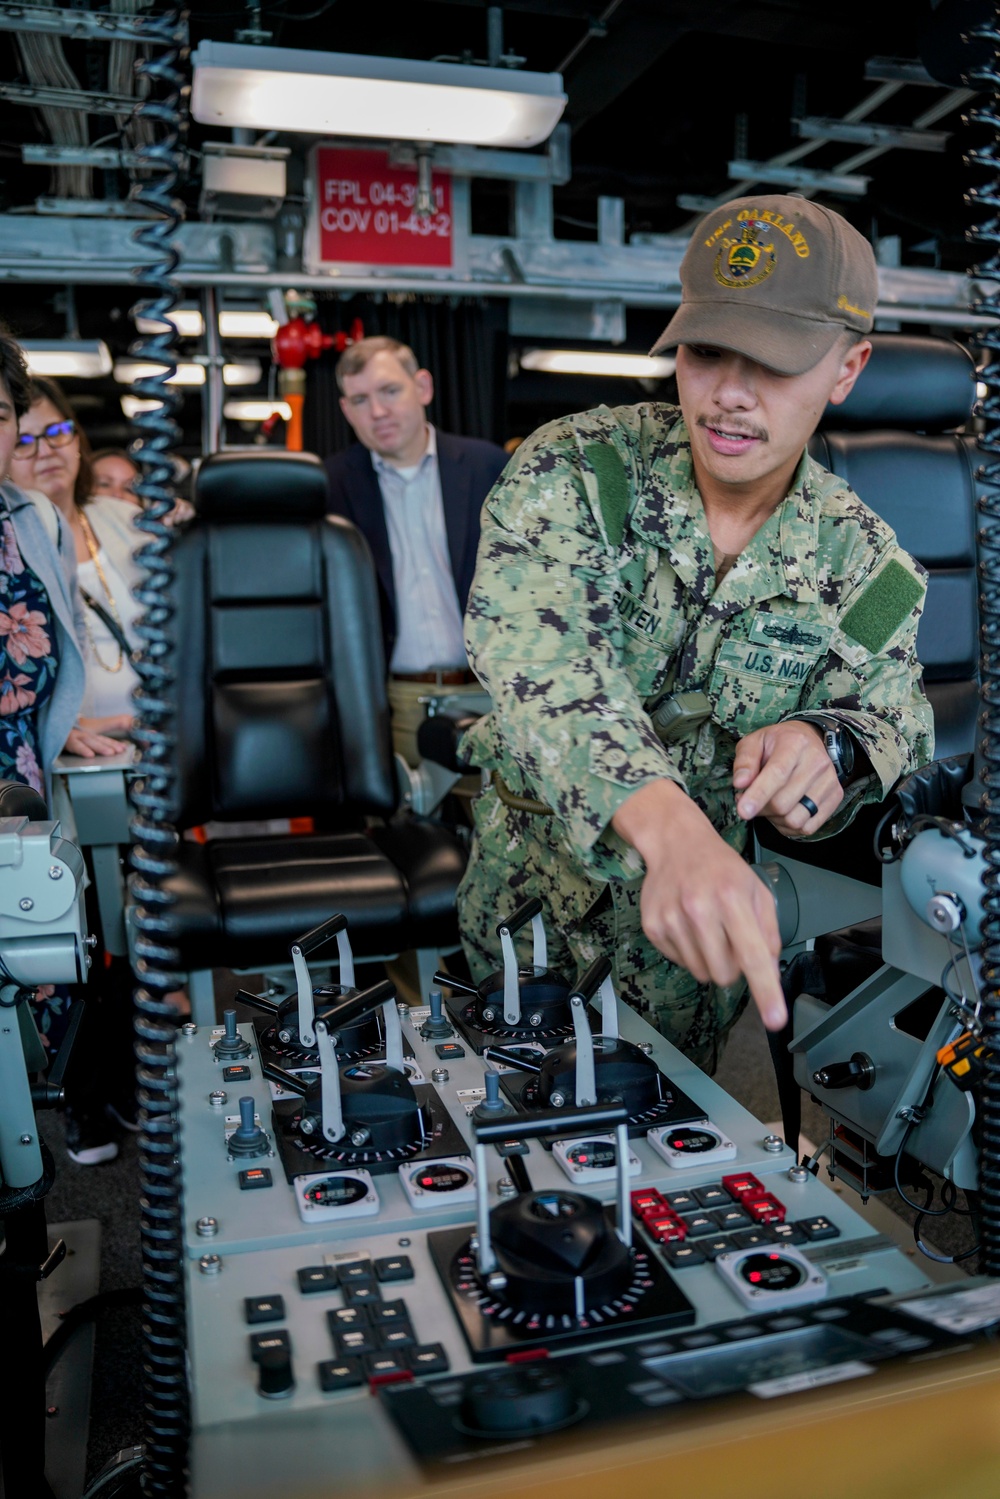 Staffers from the House Armed Services Committee Visit the USS Oakland.